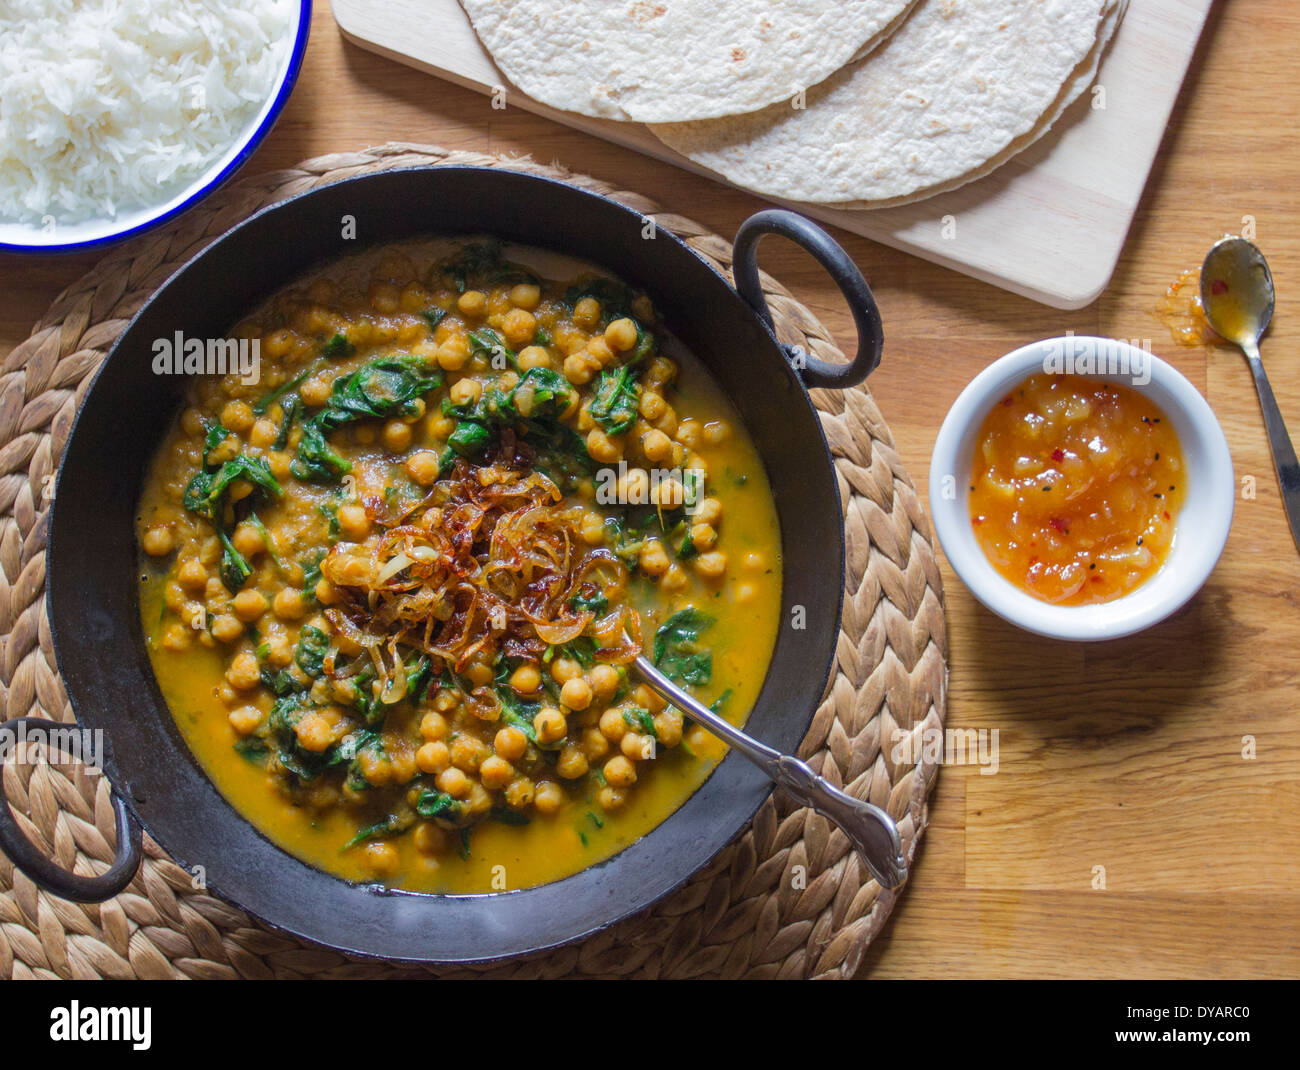 Chickpea and spinach curry with caramelised onions, rice, chapatis and mango chutney on an oak table Stock Photo